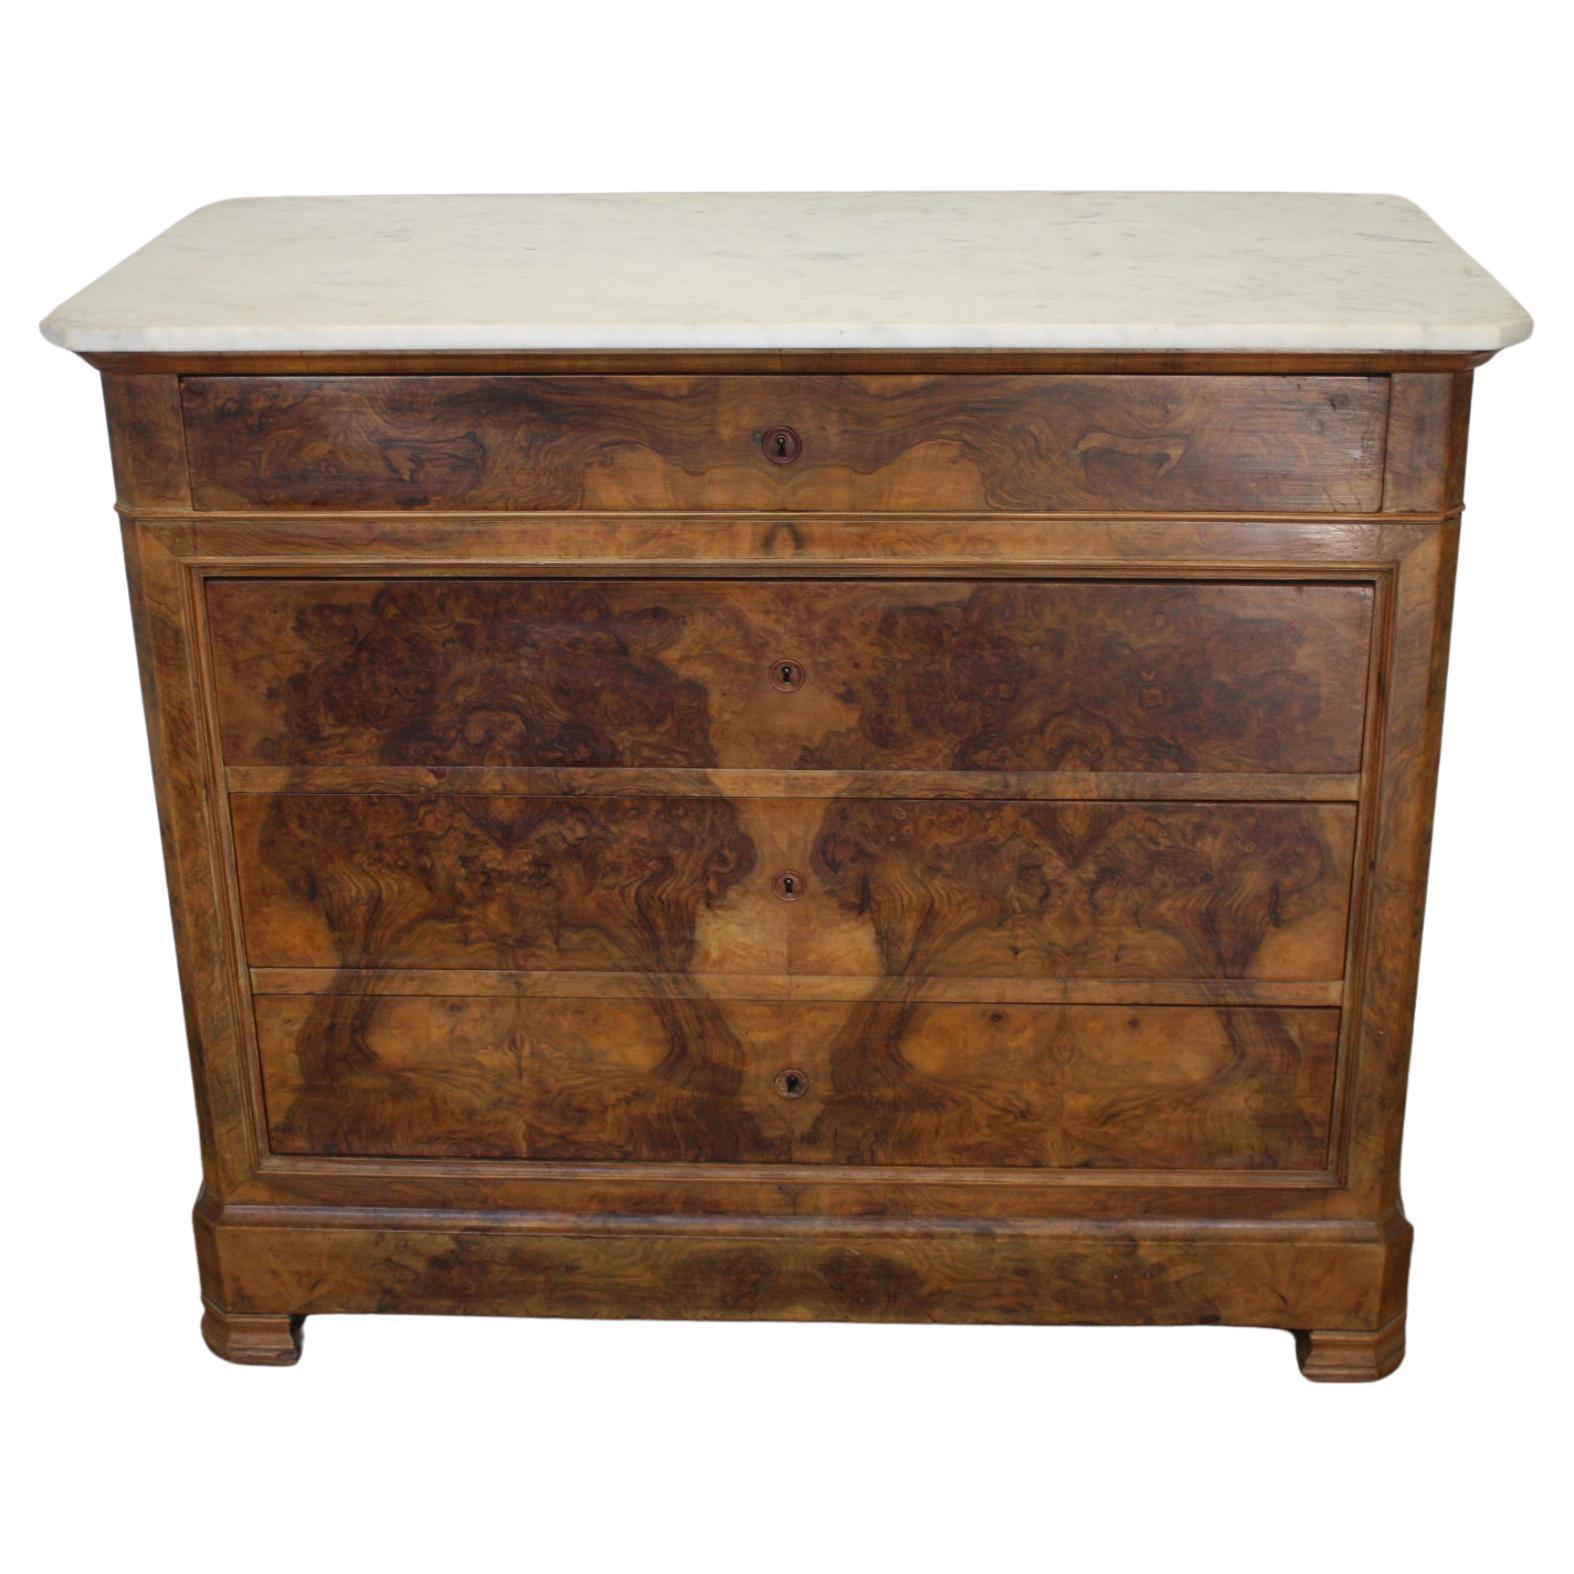 This commode is made of a beautiful flamed walnut with its original marble top. 4 drawers with its keys.